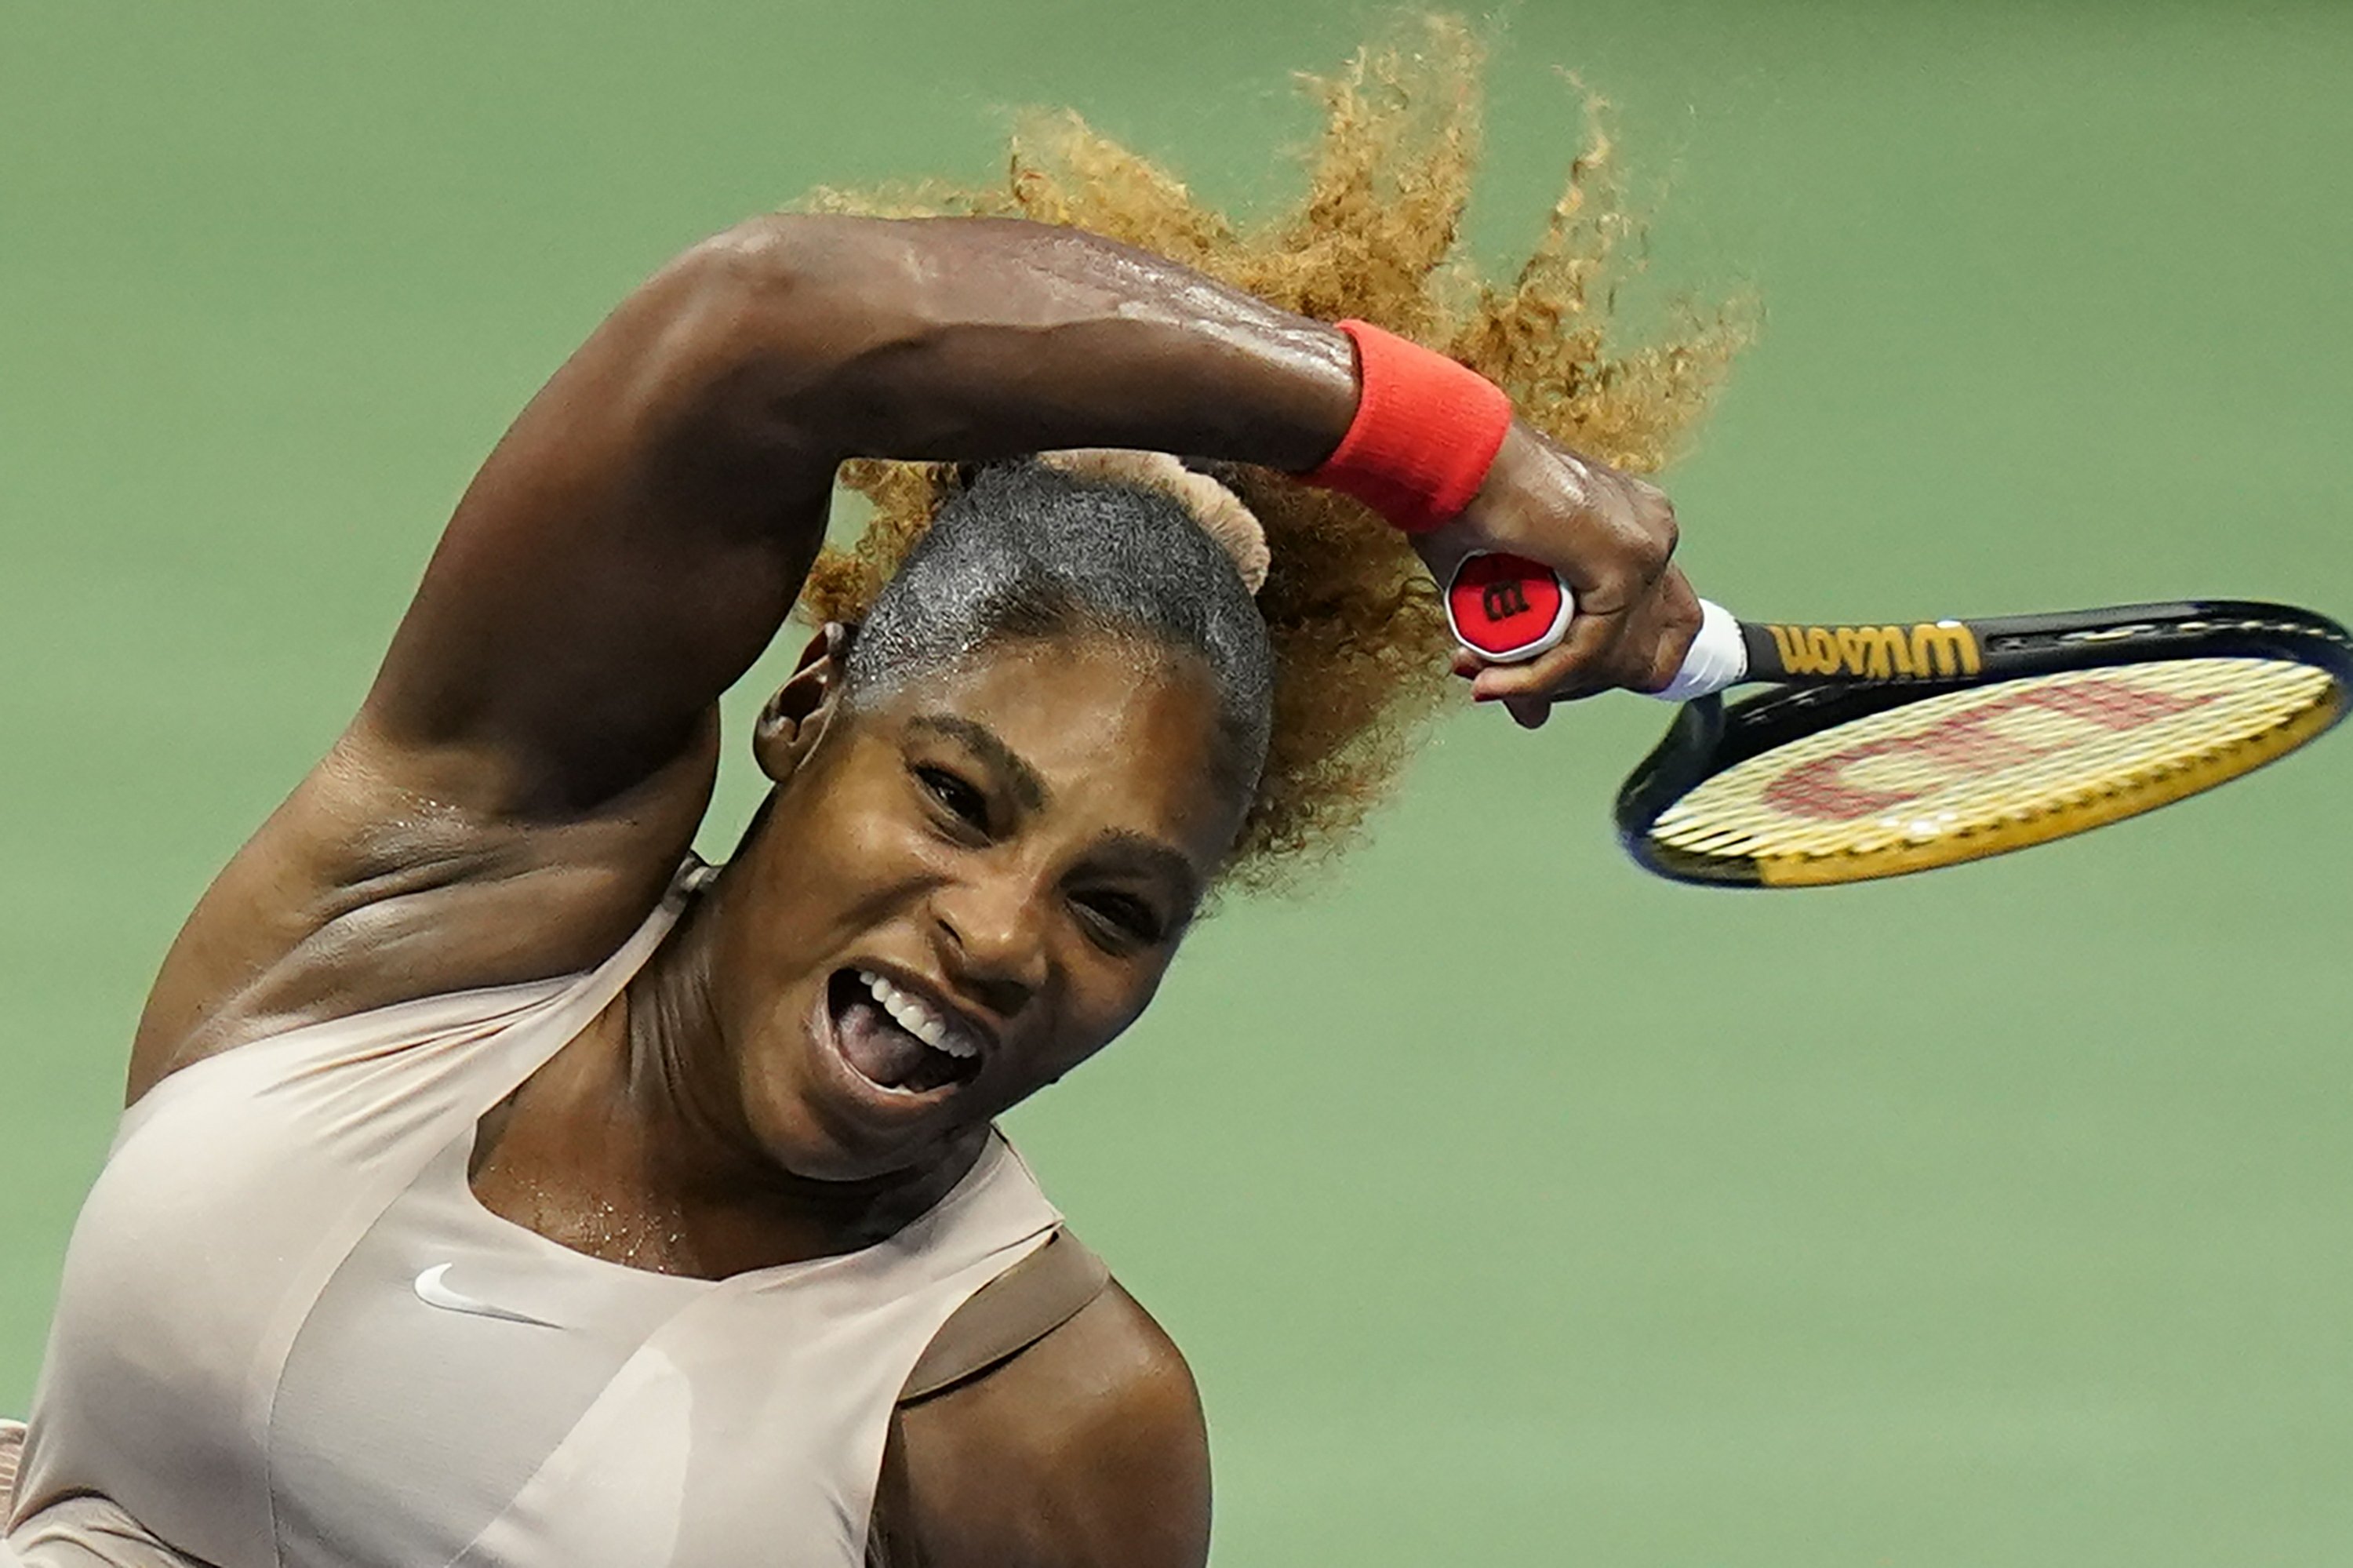 The Latest Serena Williams set for Open match with Stephens AP News